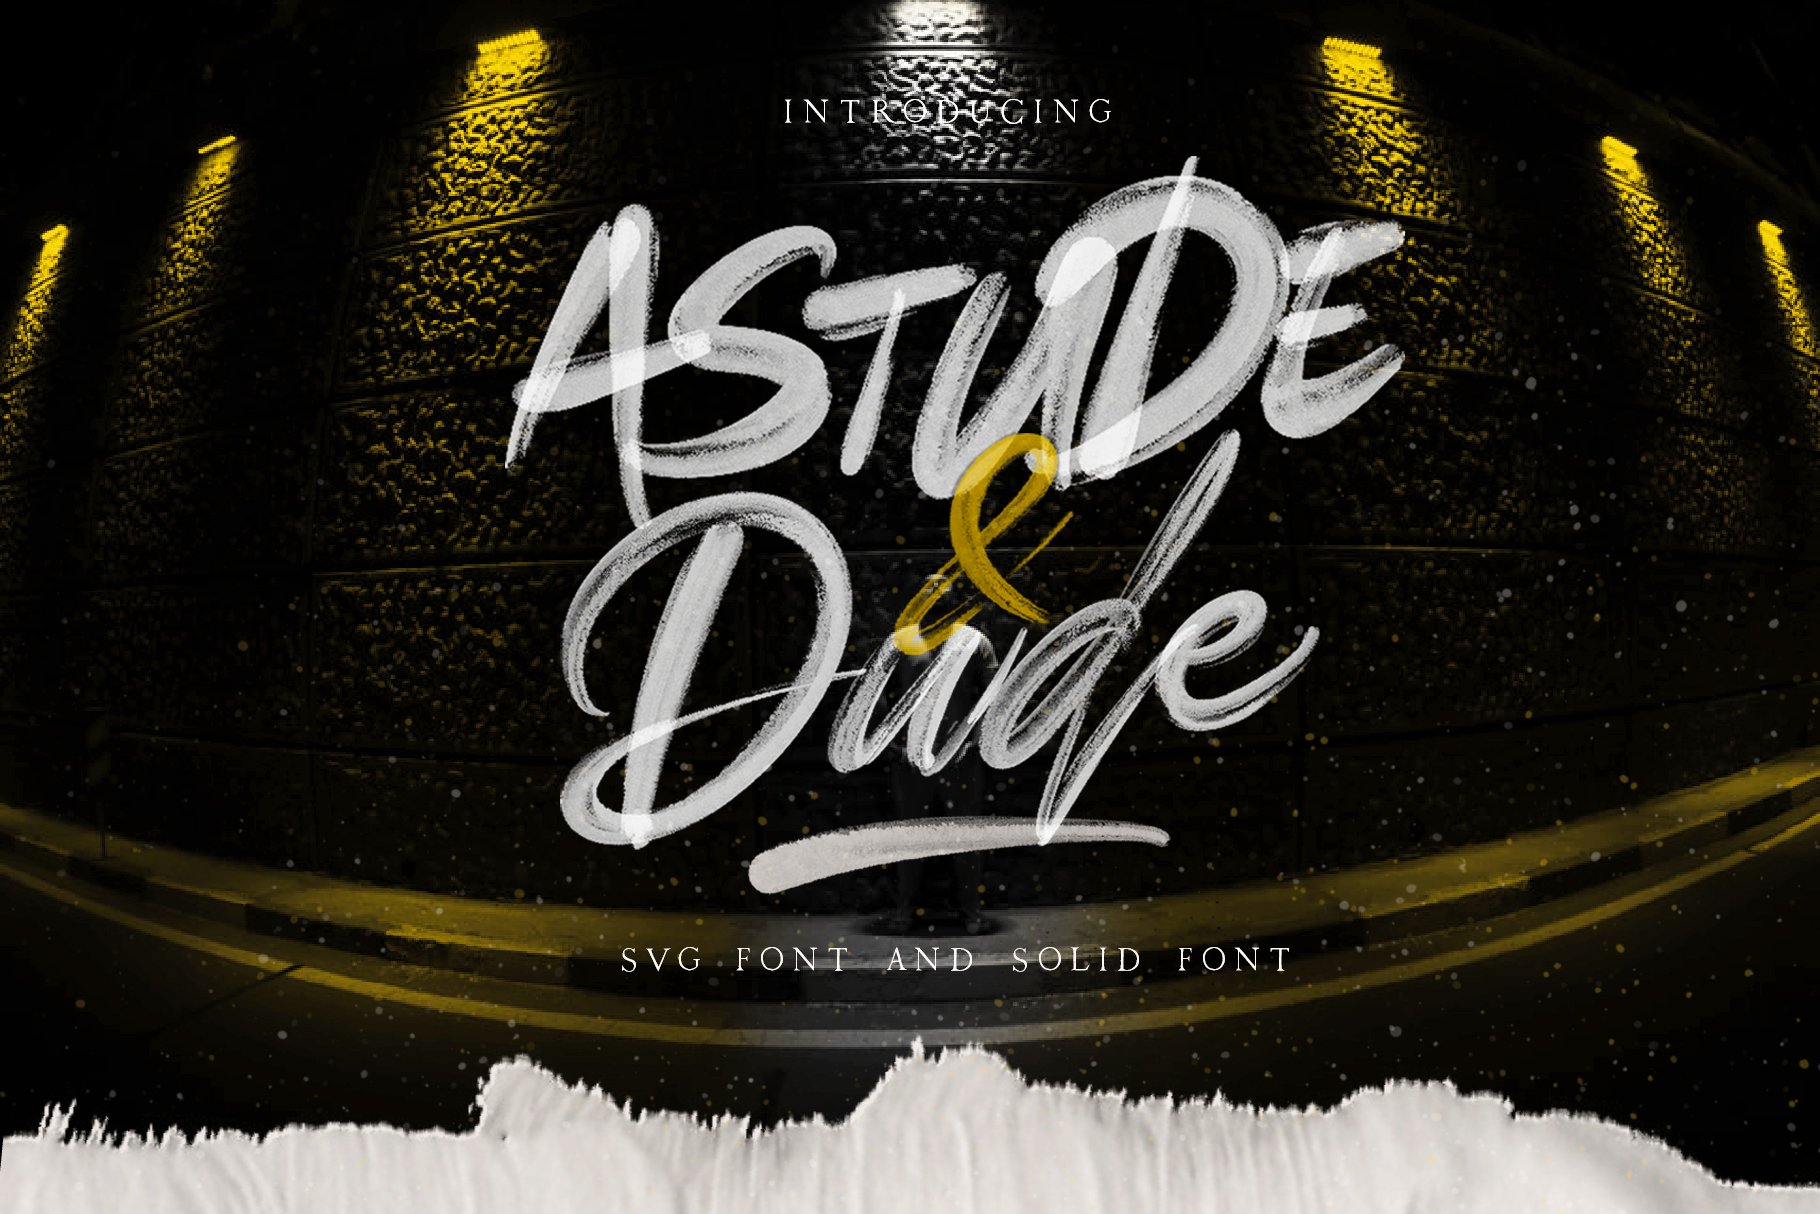 Astude & Dude SVG Font & Solid preview image.